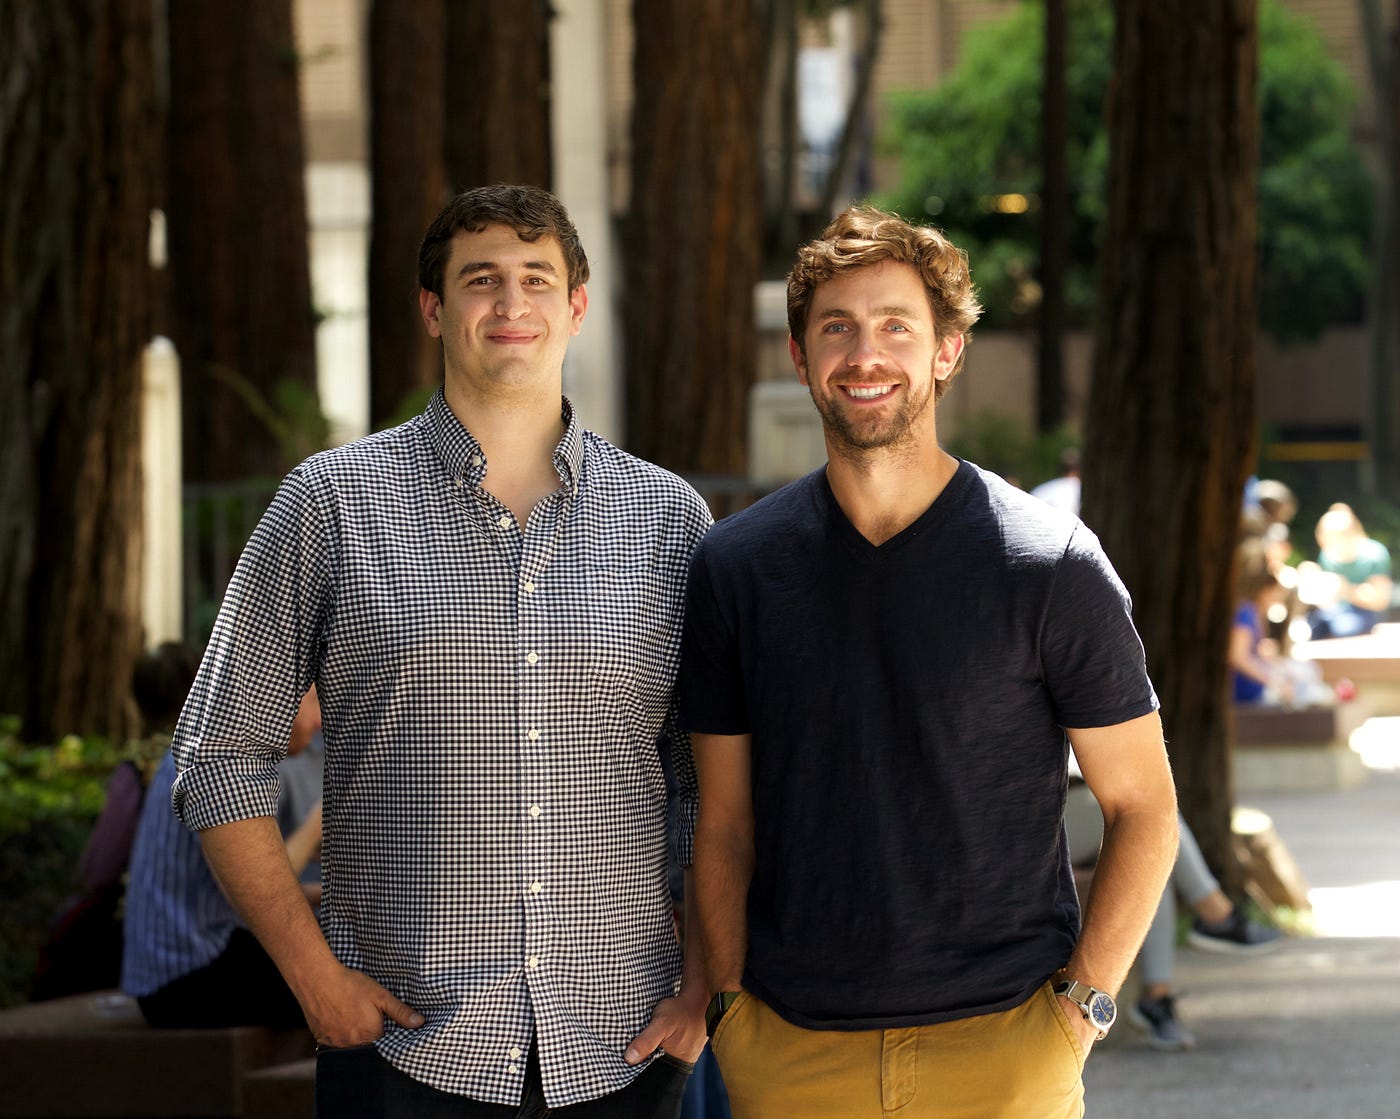 Pando’s Co-Founders Eric Lax and Charlie Olson